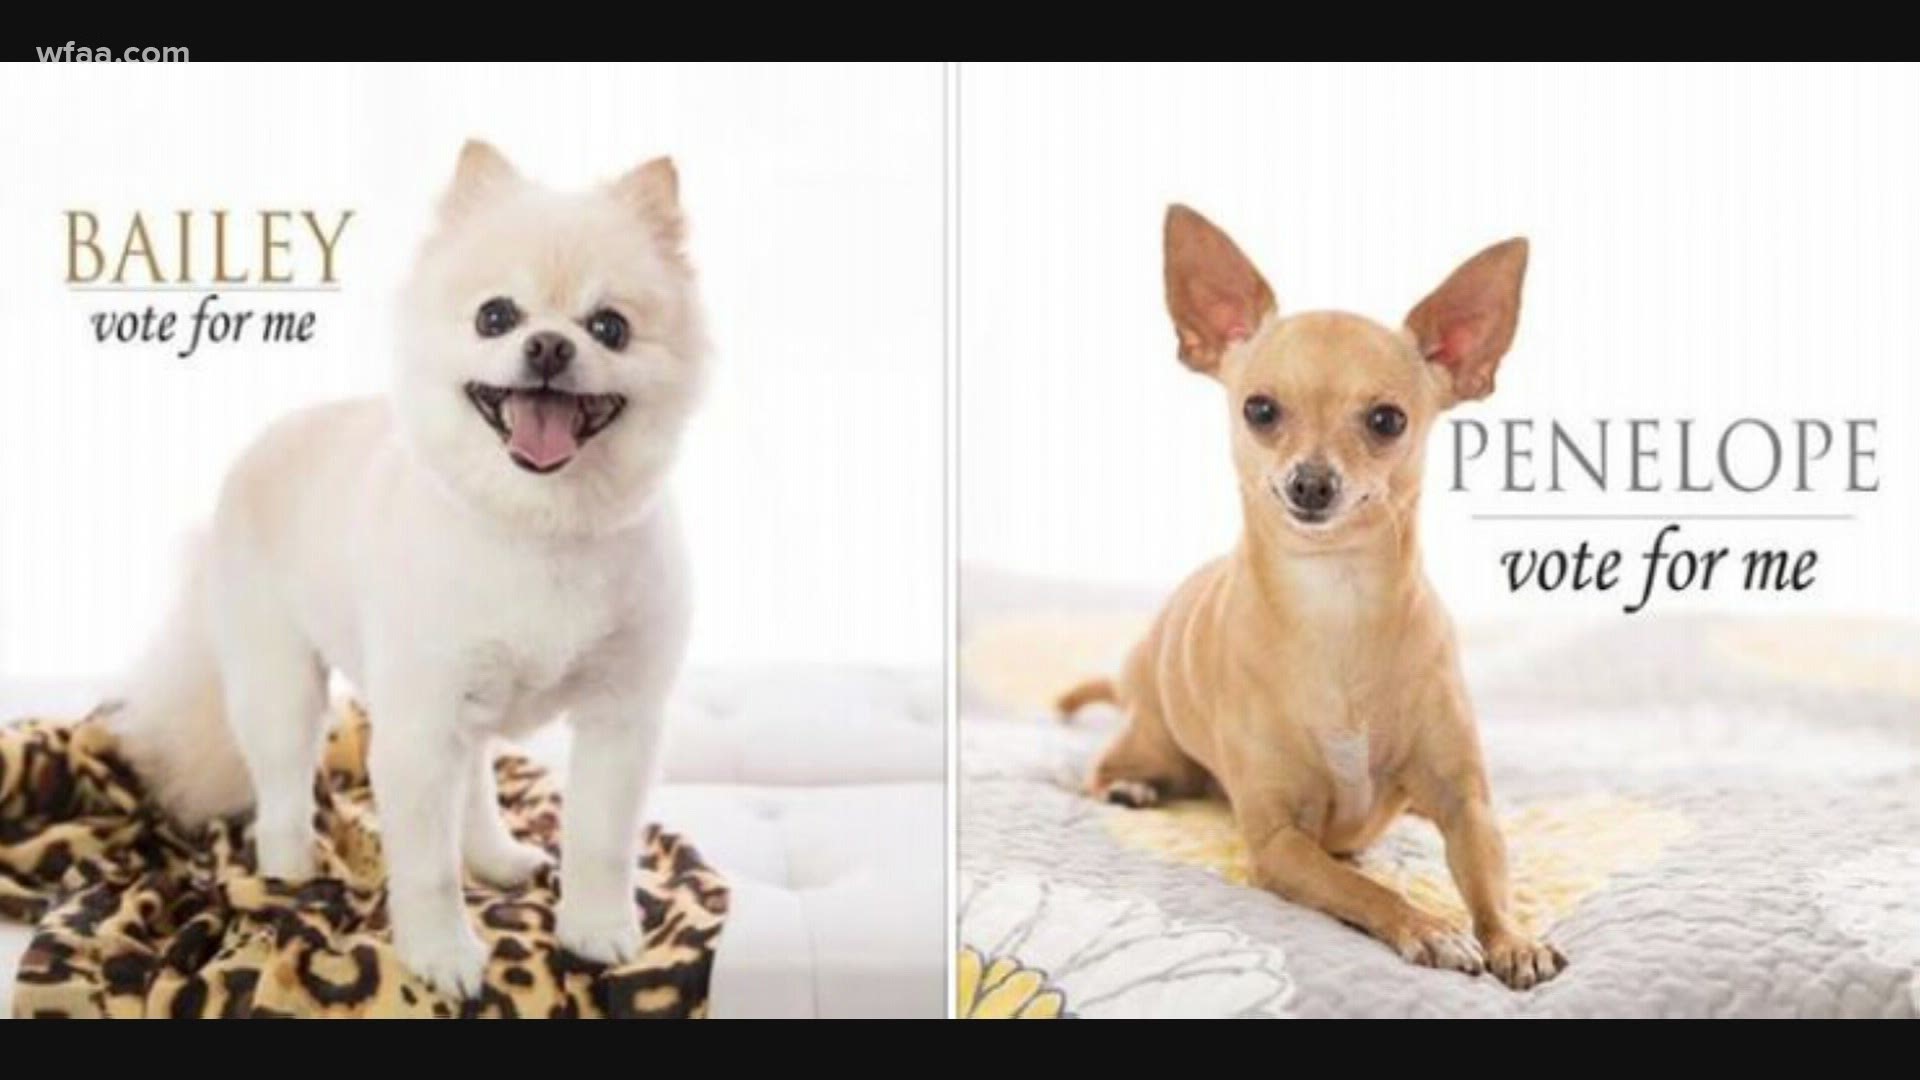 Anyone can help raise money by voting in the competition for the Tiny Dog Calendar, and WFAA's Kara Sewell has two favorites she's campaigning for.